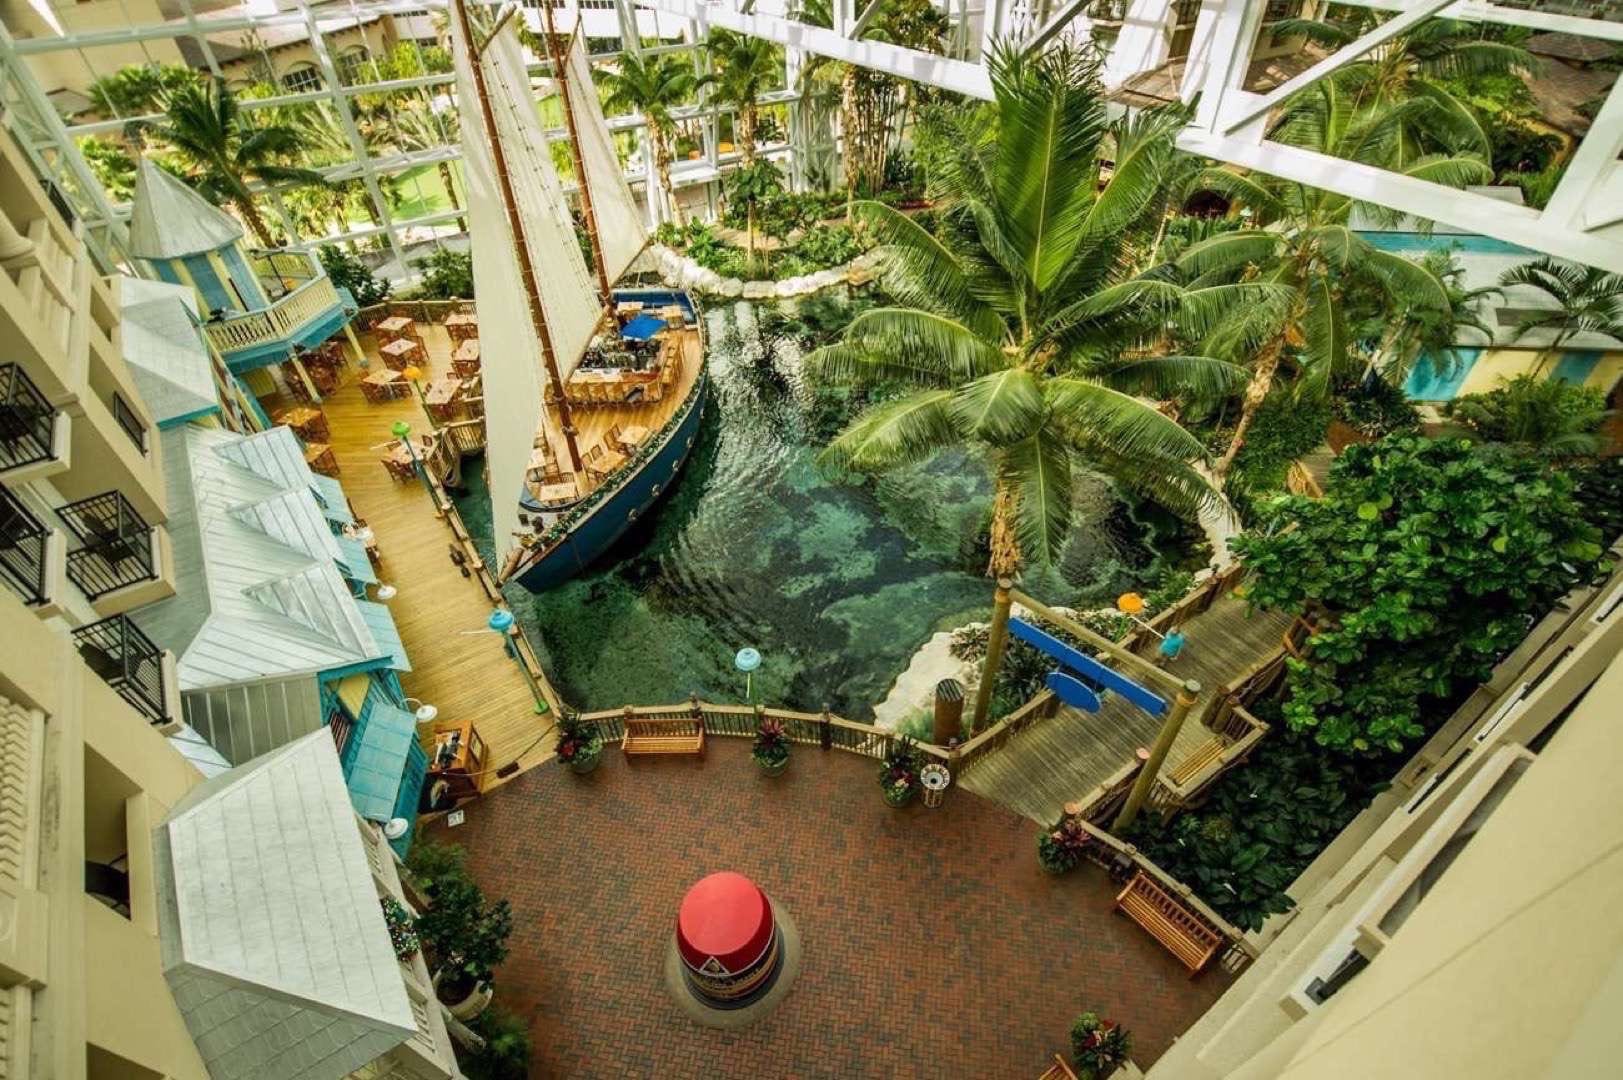 Gaylord Palms Resort and Convention Center Overhead view of Interior showing a marine themed area with a small ship, walkways, marker, palm trees and trees.